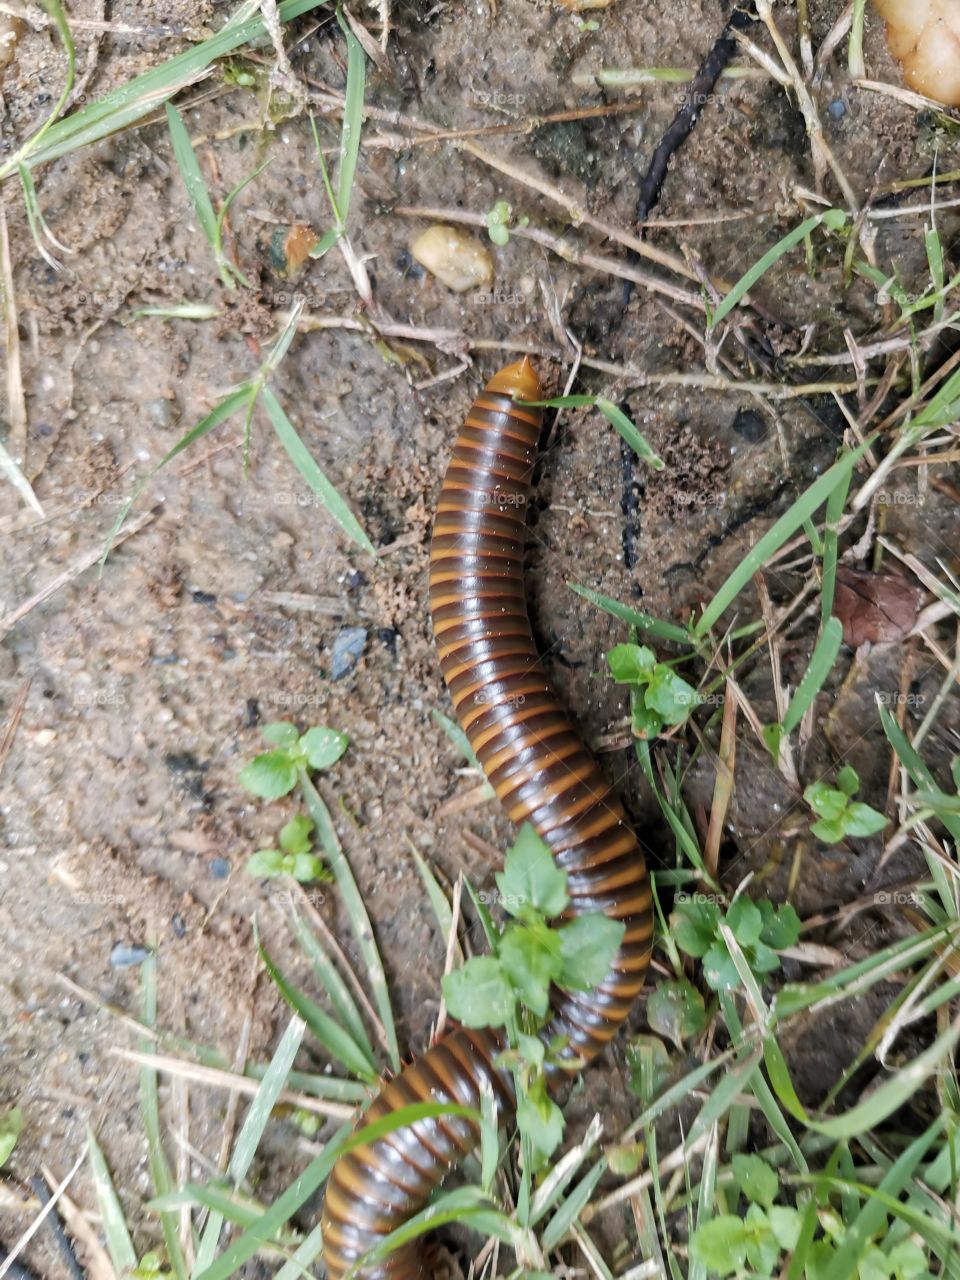 Millipede Crawling Along the Grass